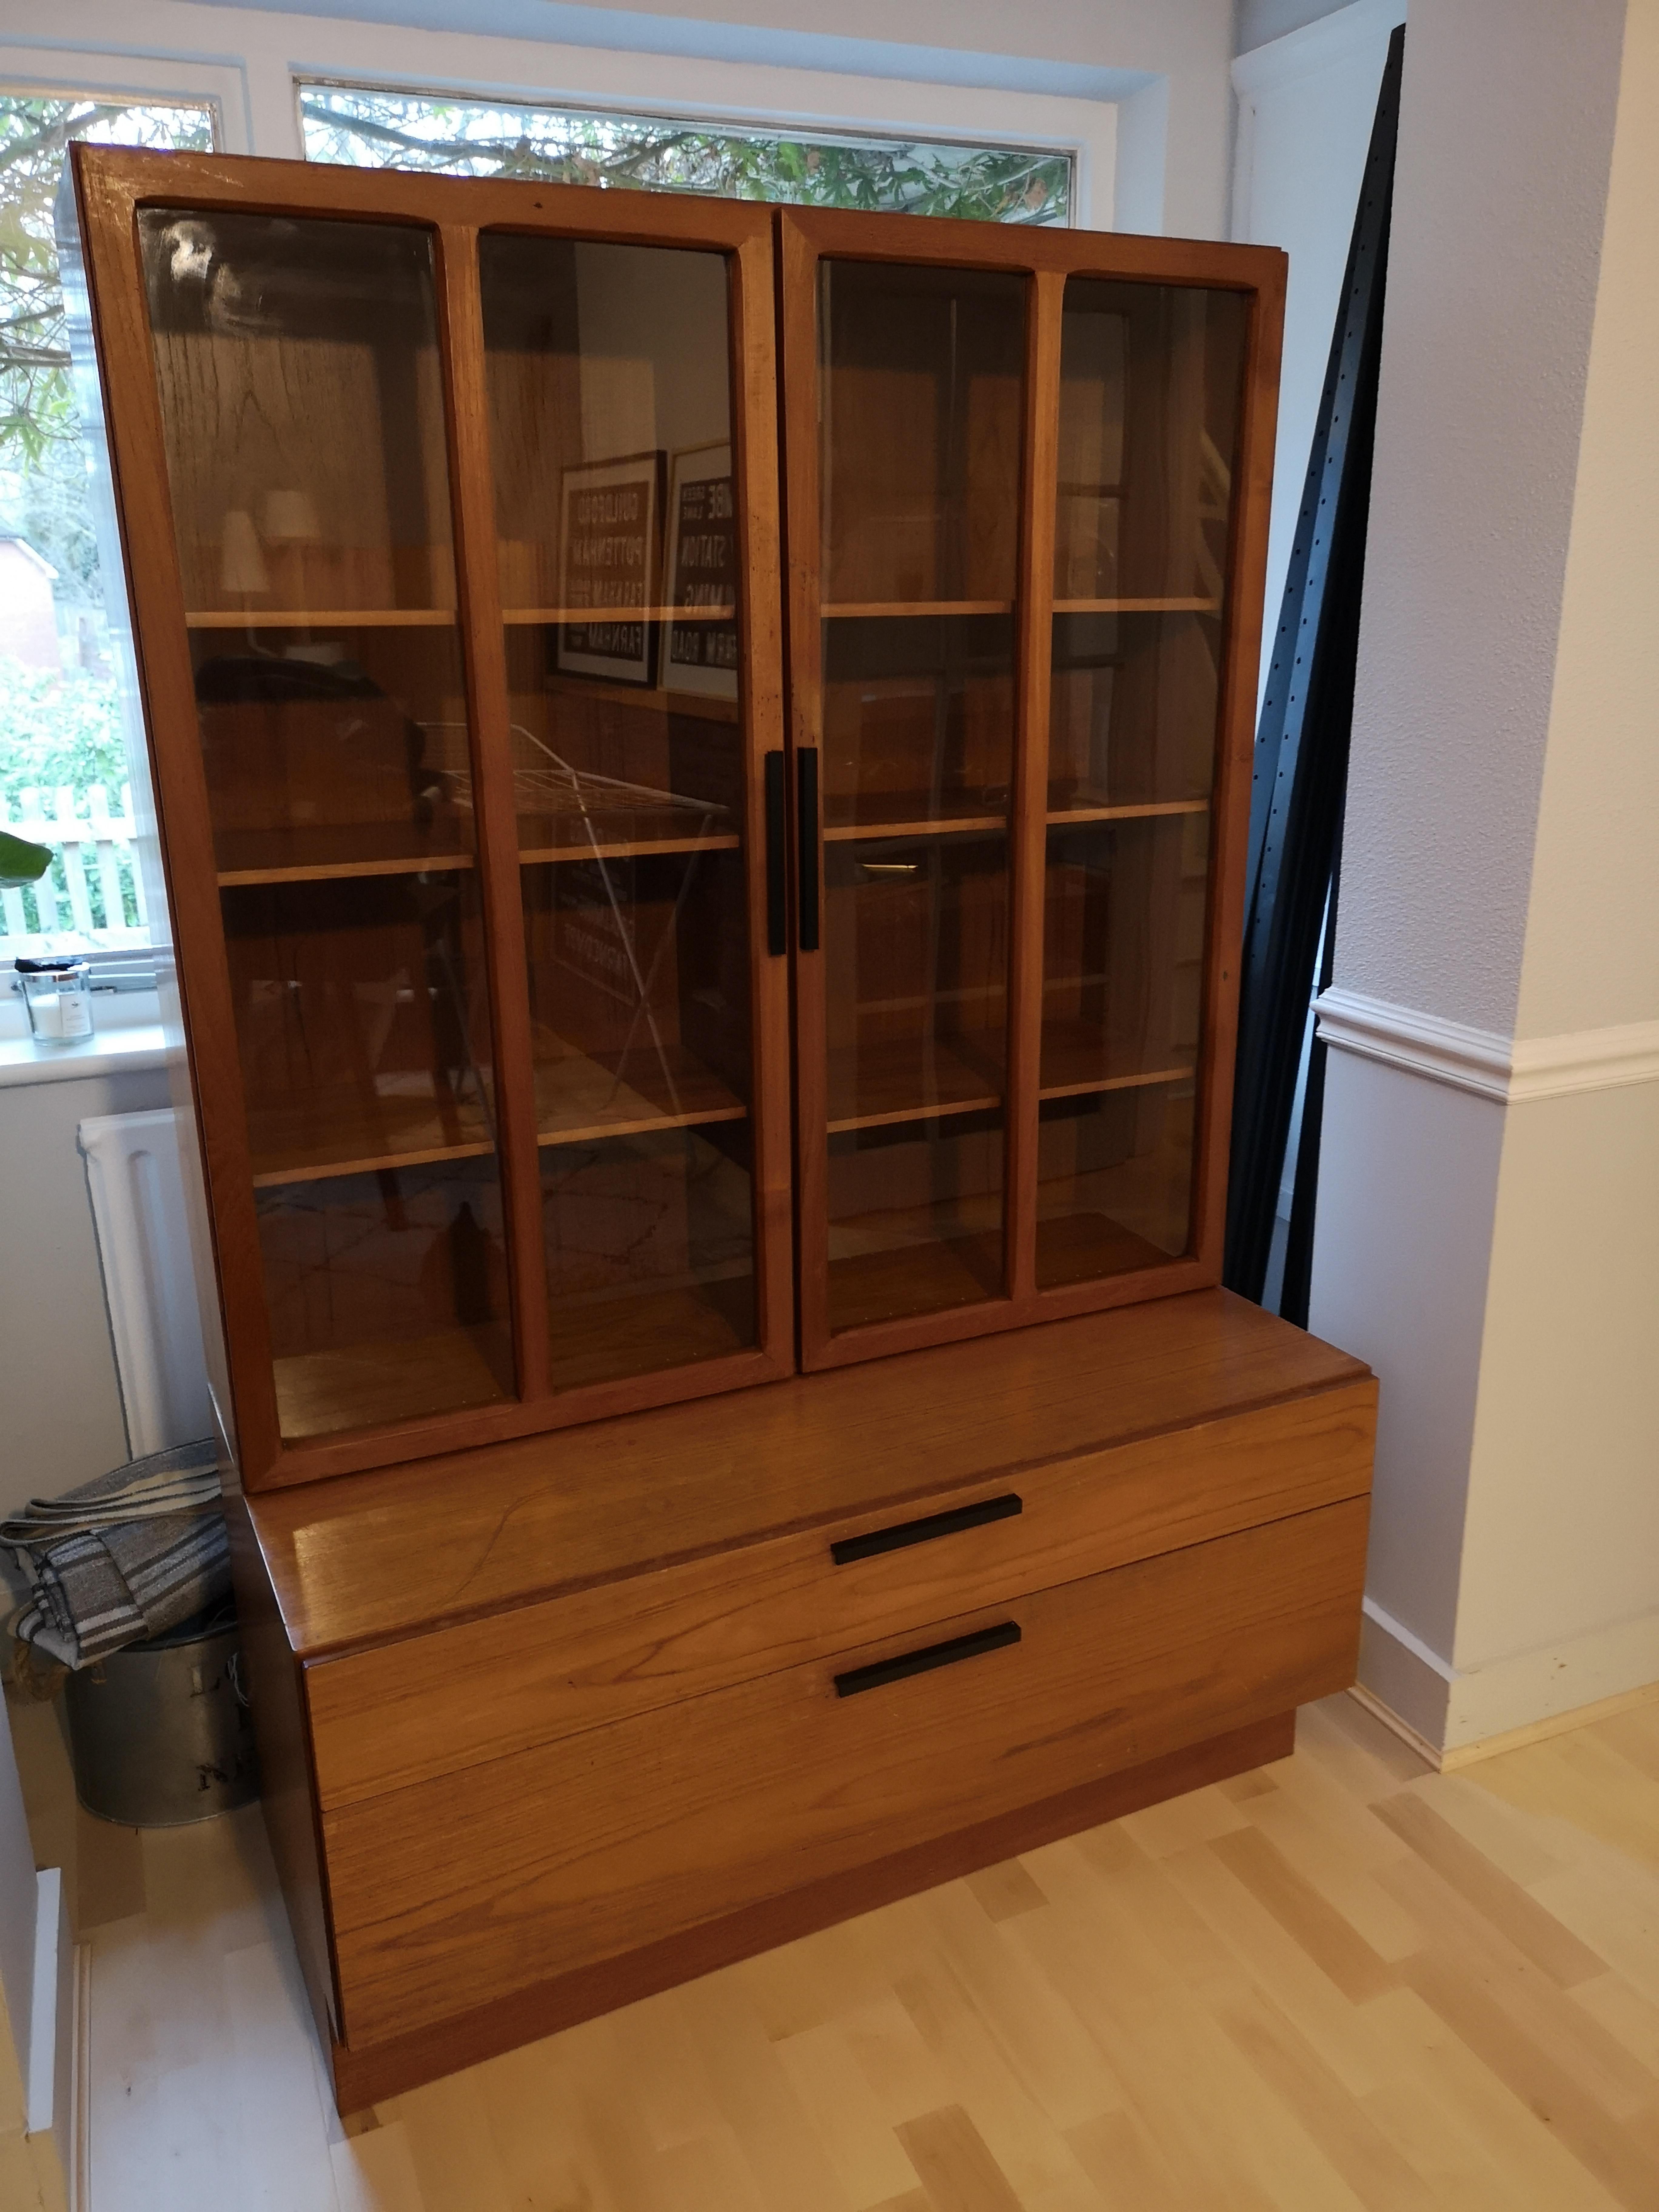 A stunning midcentury Display Cabinet by Ib Kofod Larsen for Faarup Möbelfabriken. The cabinet consists of low sideboad with drawers and a display cabinet with glass doors on top.